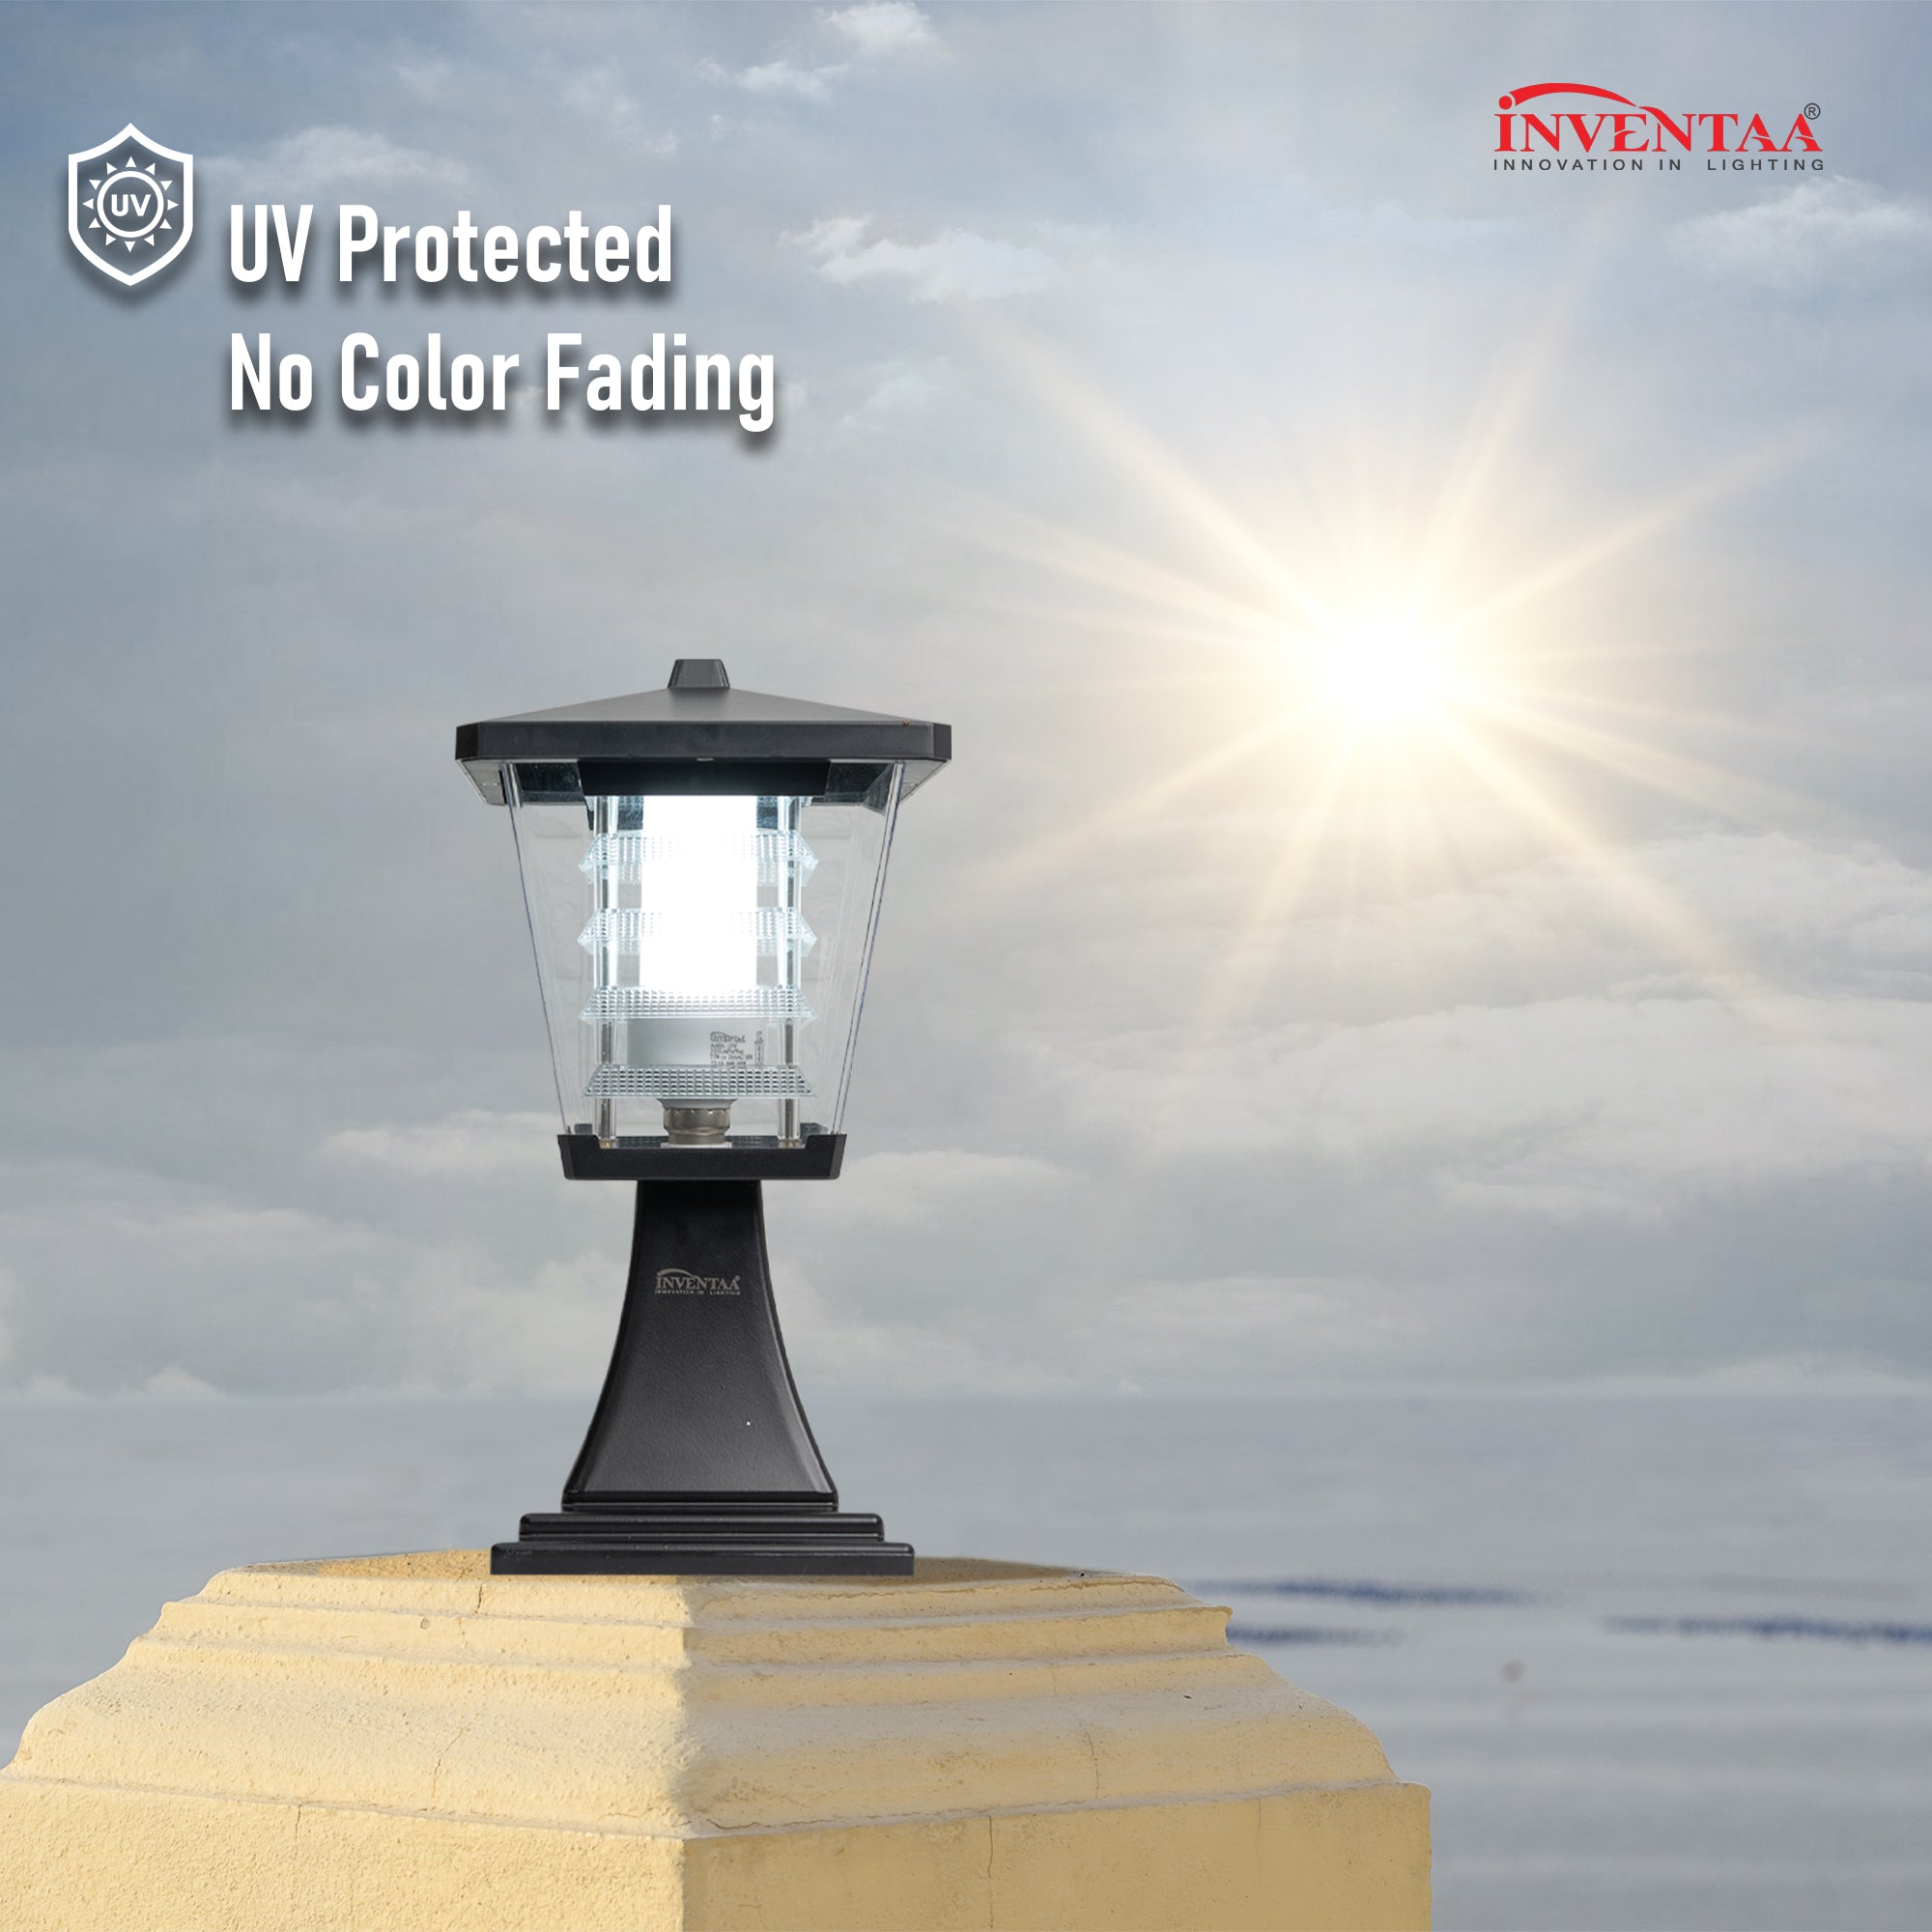 Mini glasis led gate light with UV protection and no color fading #bulb options_cool